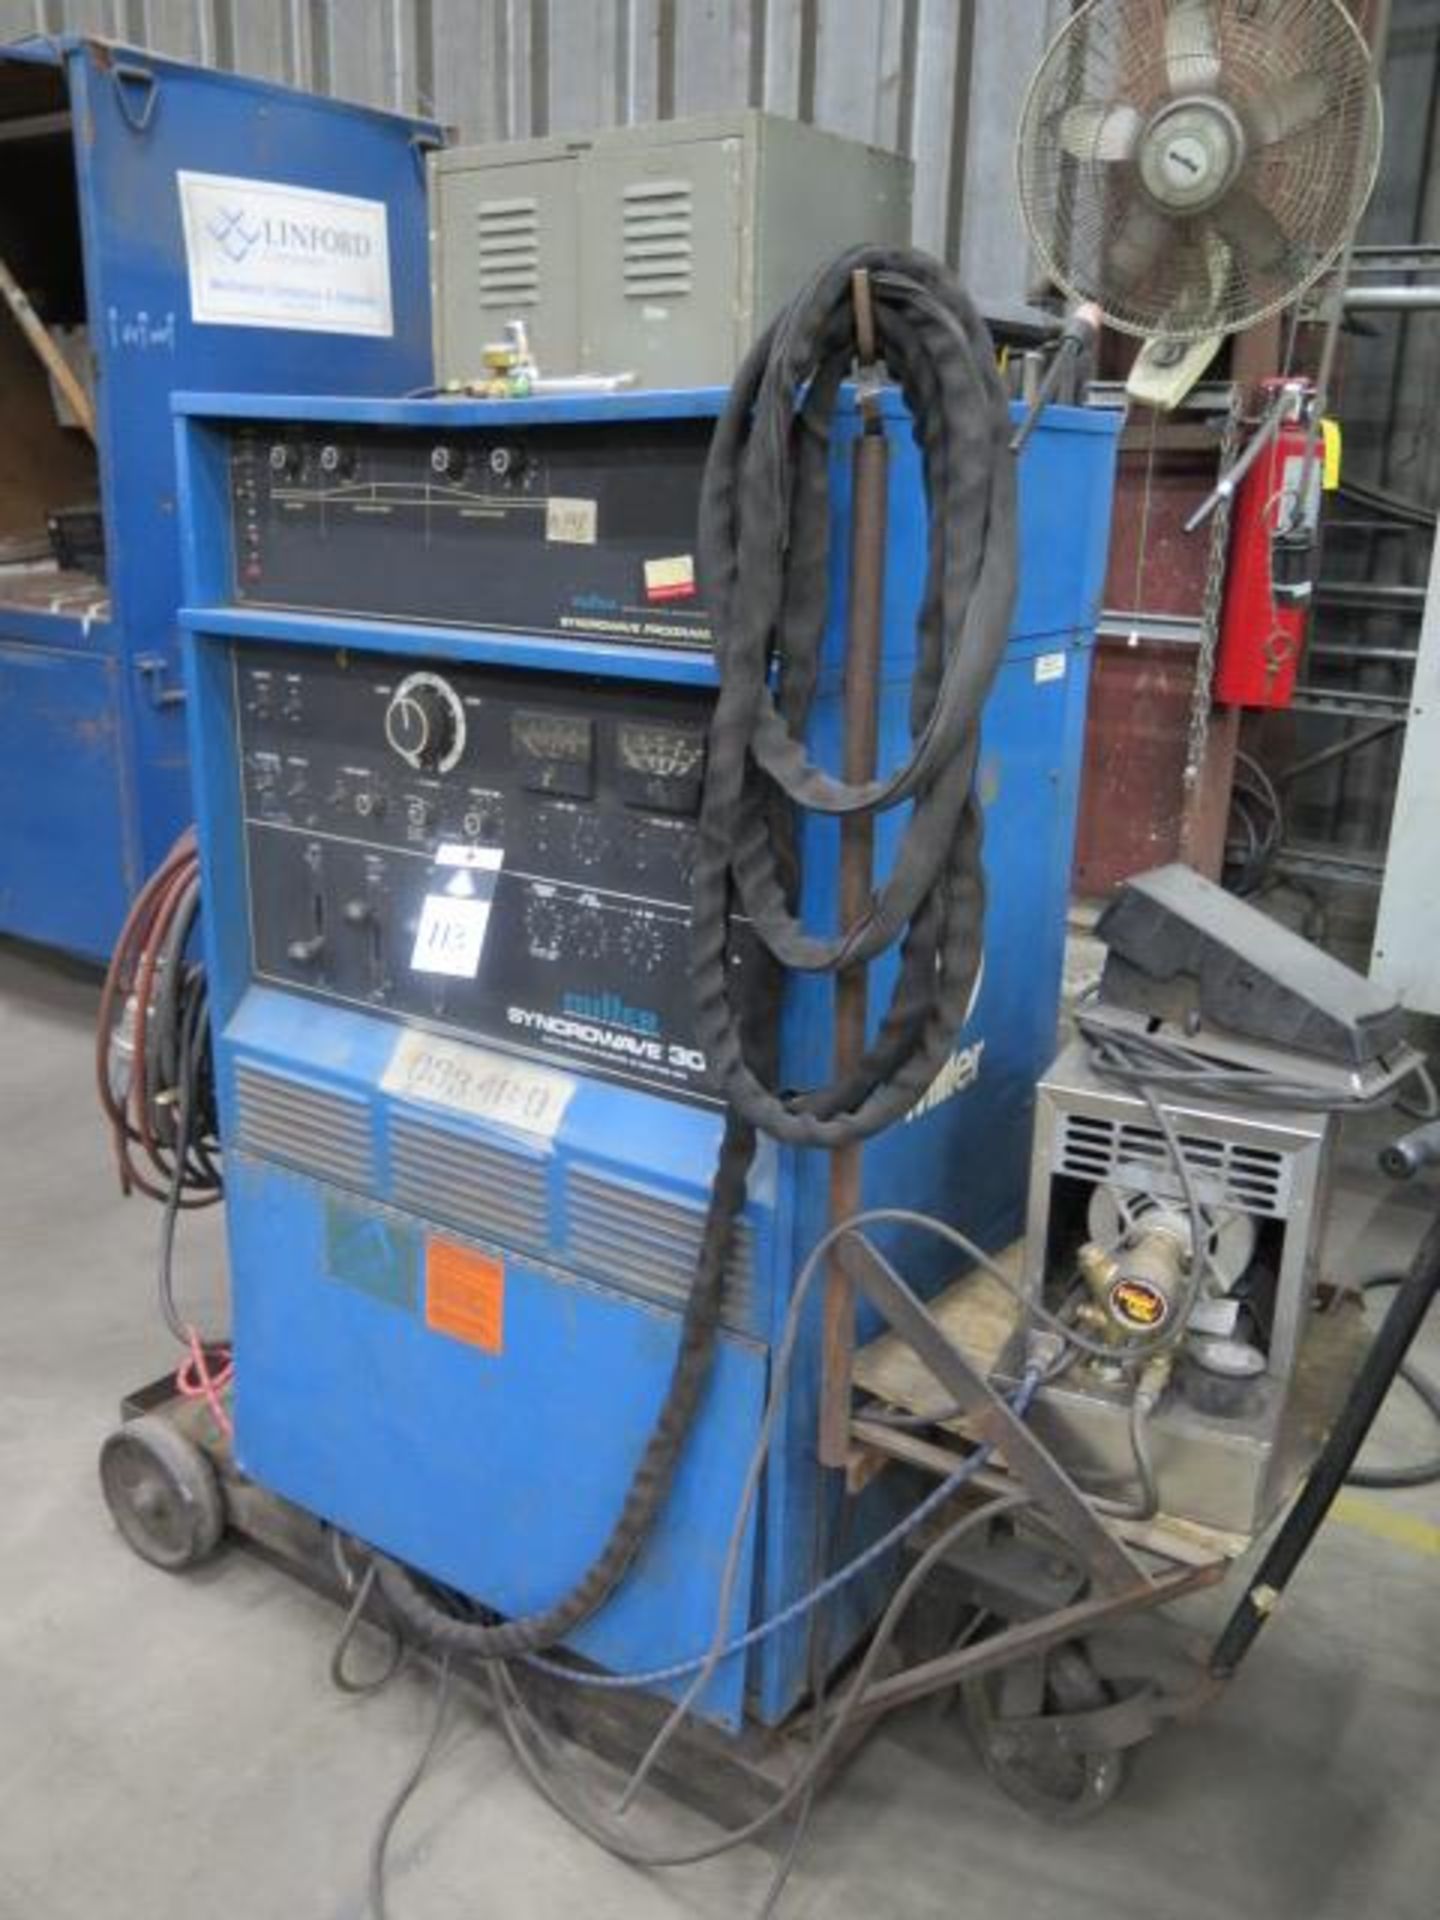 Miller Syncrowave 300 AC/DC Arc Welding Power Source w/ Weld-Tec Cooler, Cart (SOLD AS-IS - NO - Image 2 of 10